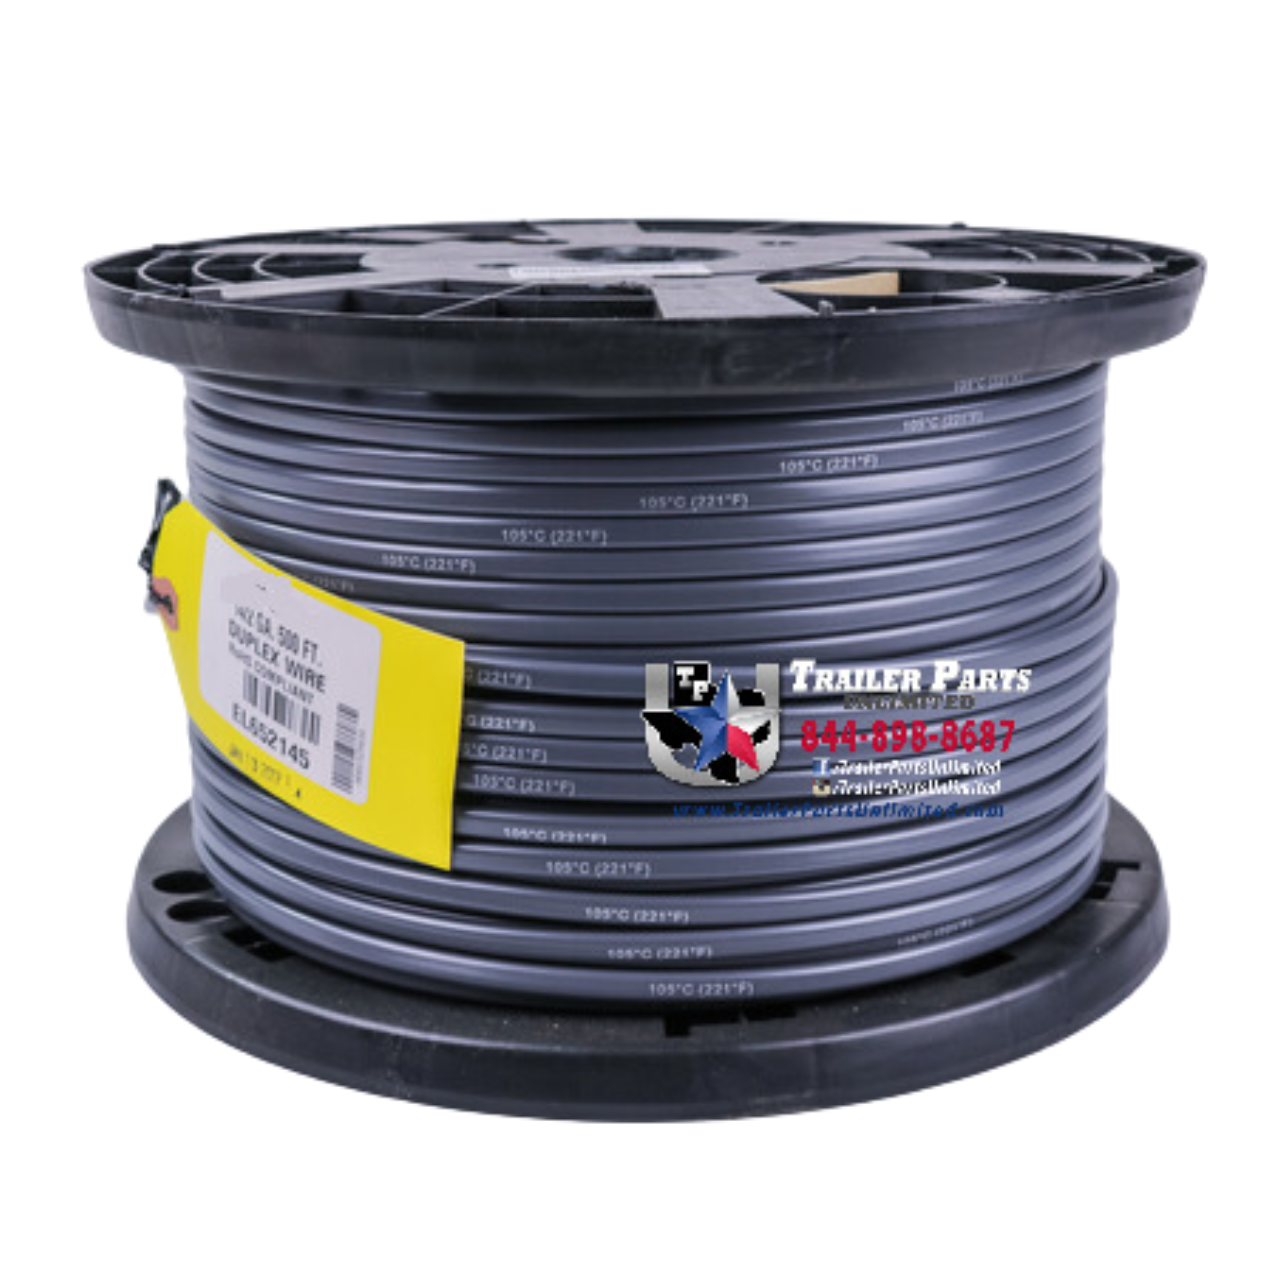 https://cdn11.bigcommerce.com/s-2wzik2aols/images/stencil/1280x1280/products/1350/10467/2-Way_Wire_14_Gauge_2-Conductor_Trailer_Cable_2__17386.1705641499.png?c=2